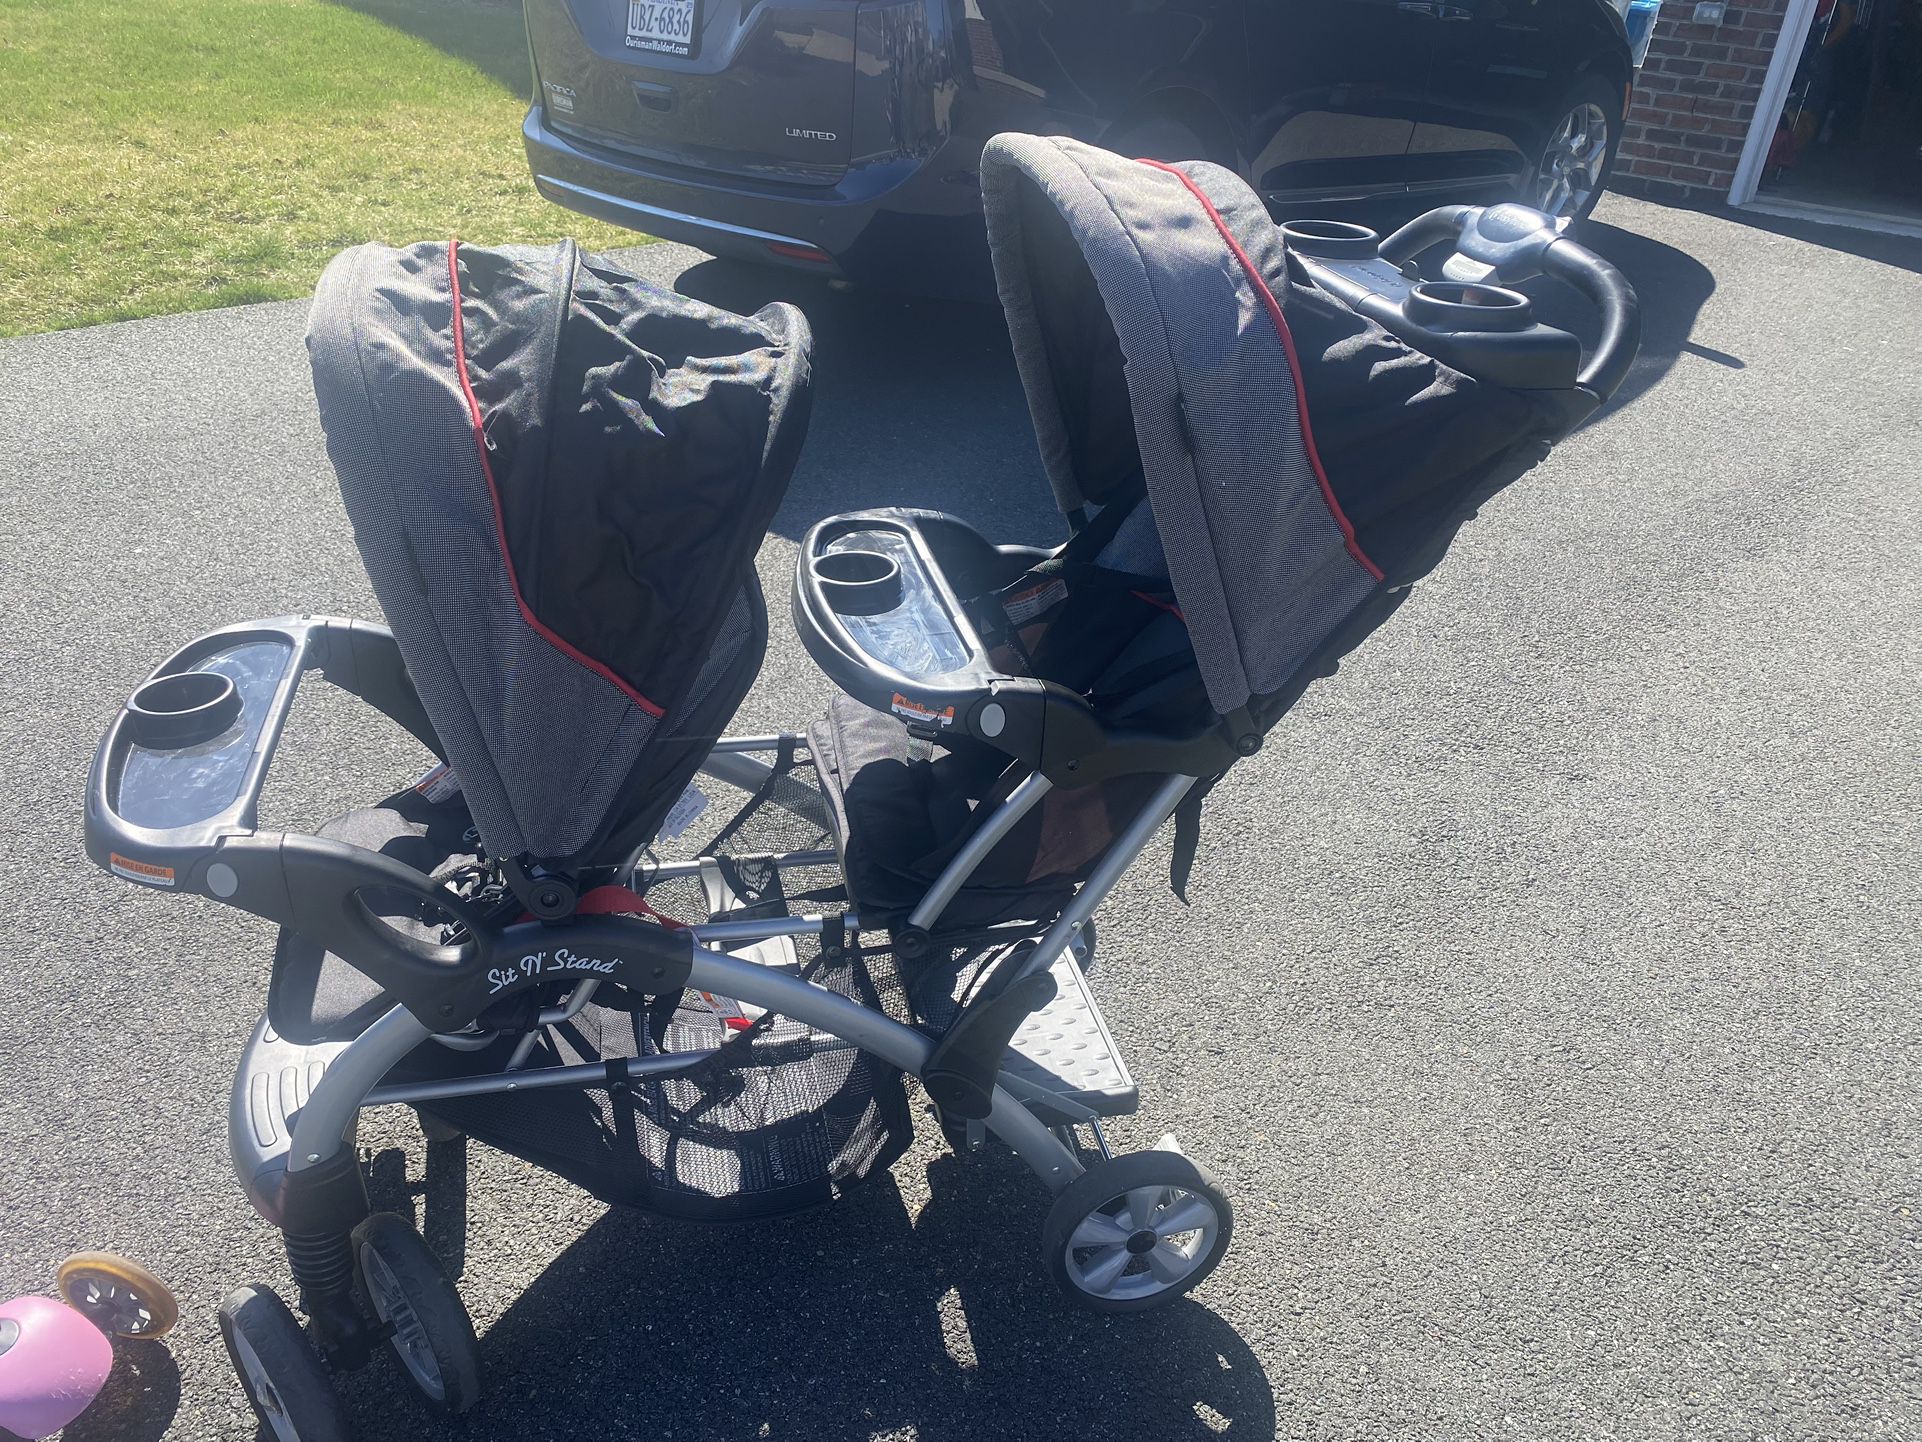 Baby Trend Sit And Stand Double Stroller